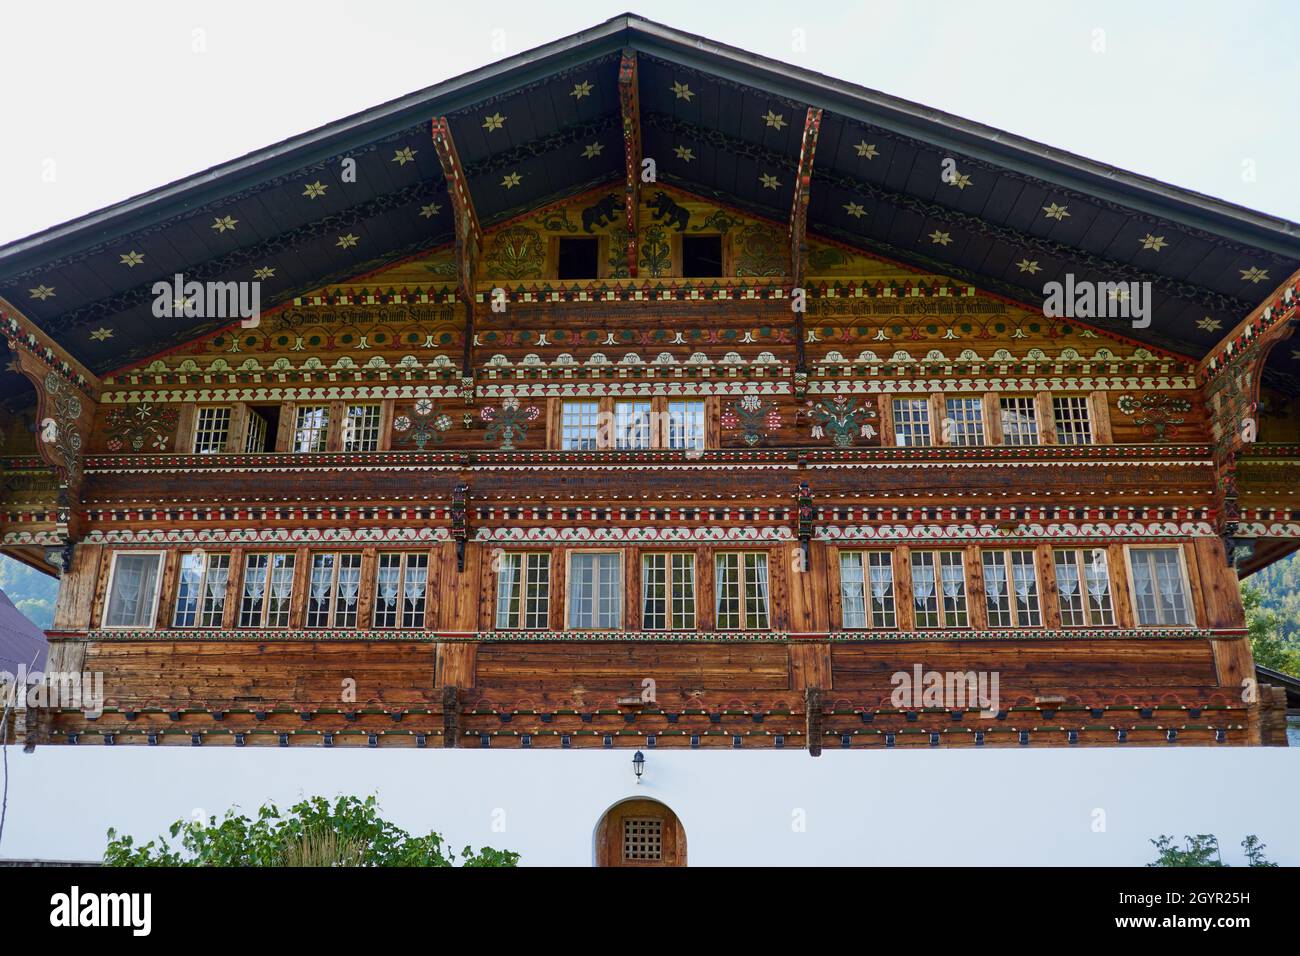 Knuttihaus, perhaps the most beautiful Swiss chalet - in the Simmen Valley of Berner Oberland, Switzerland Stock Photo